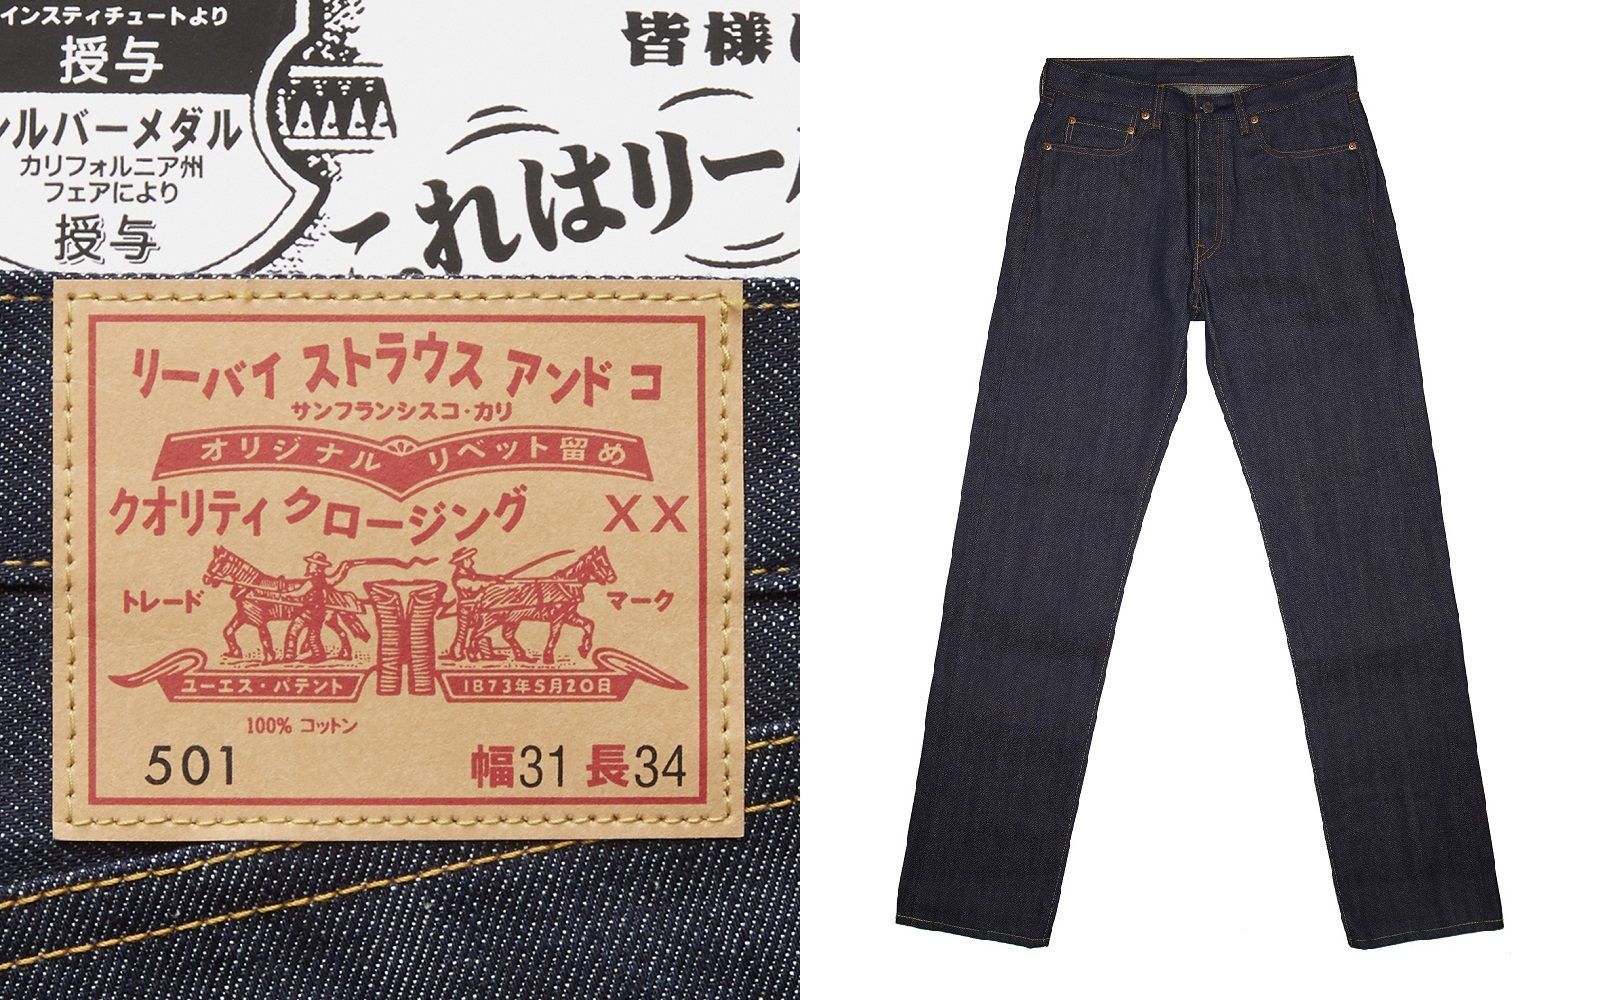 levi's limited edition jeans